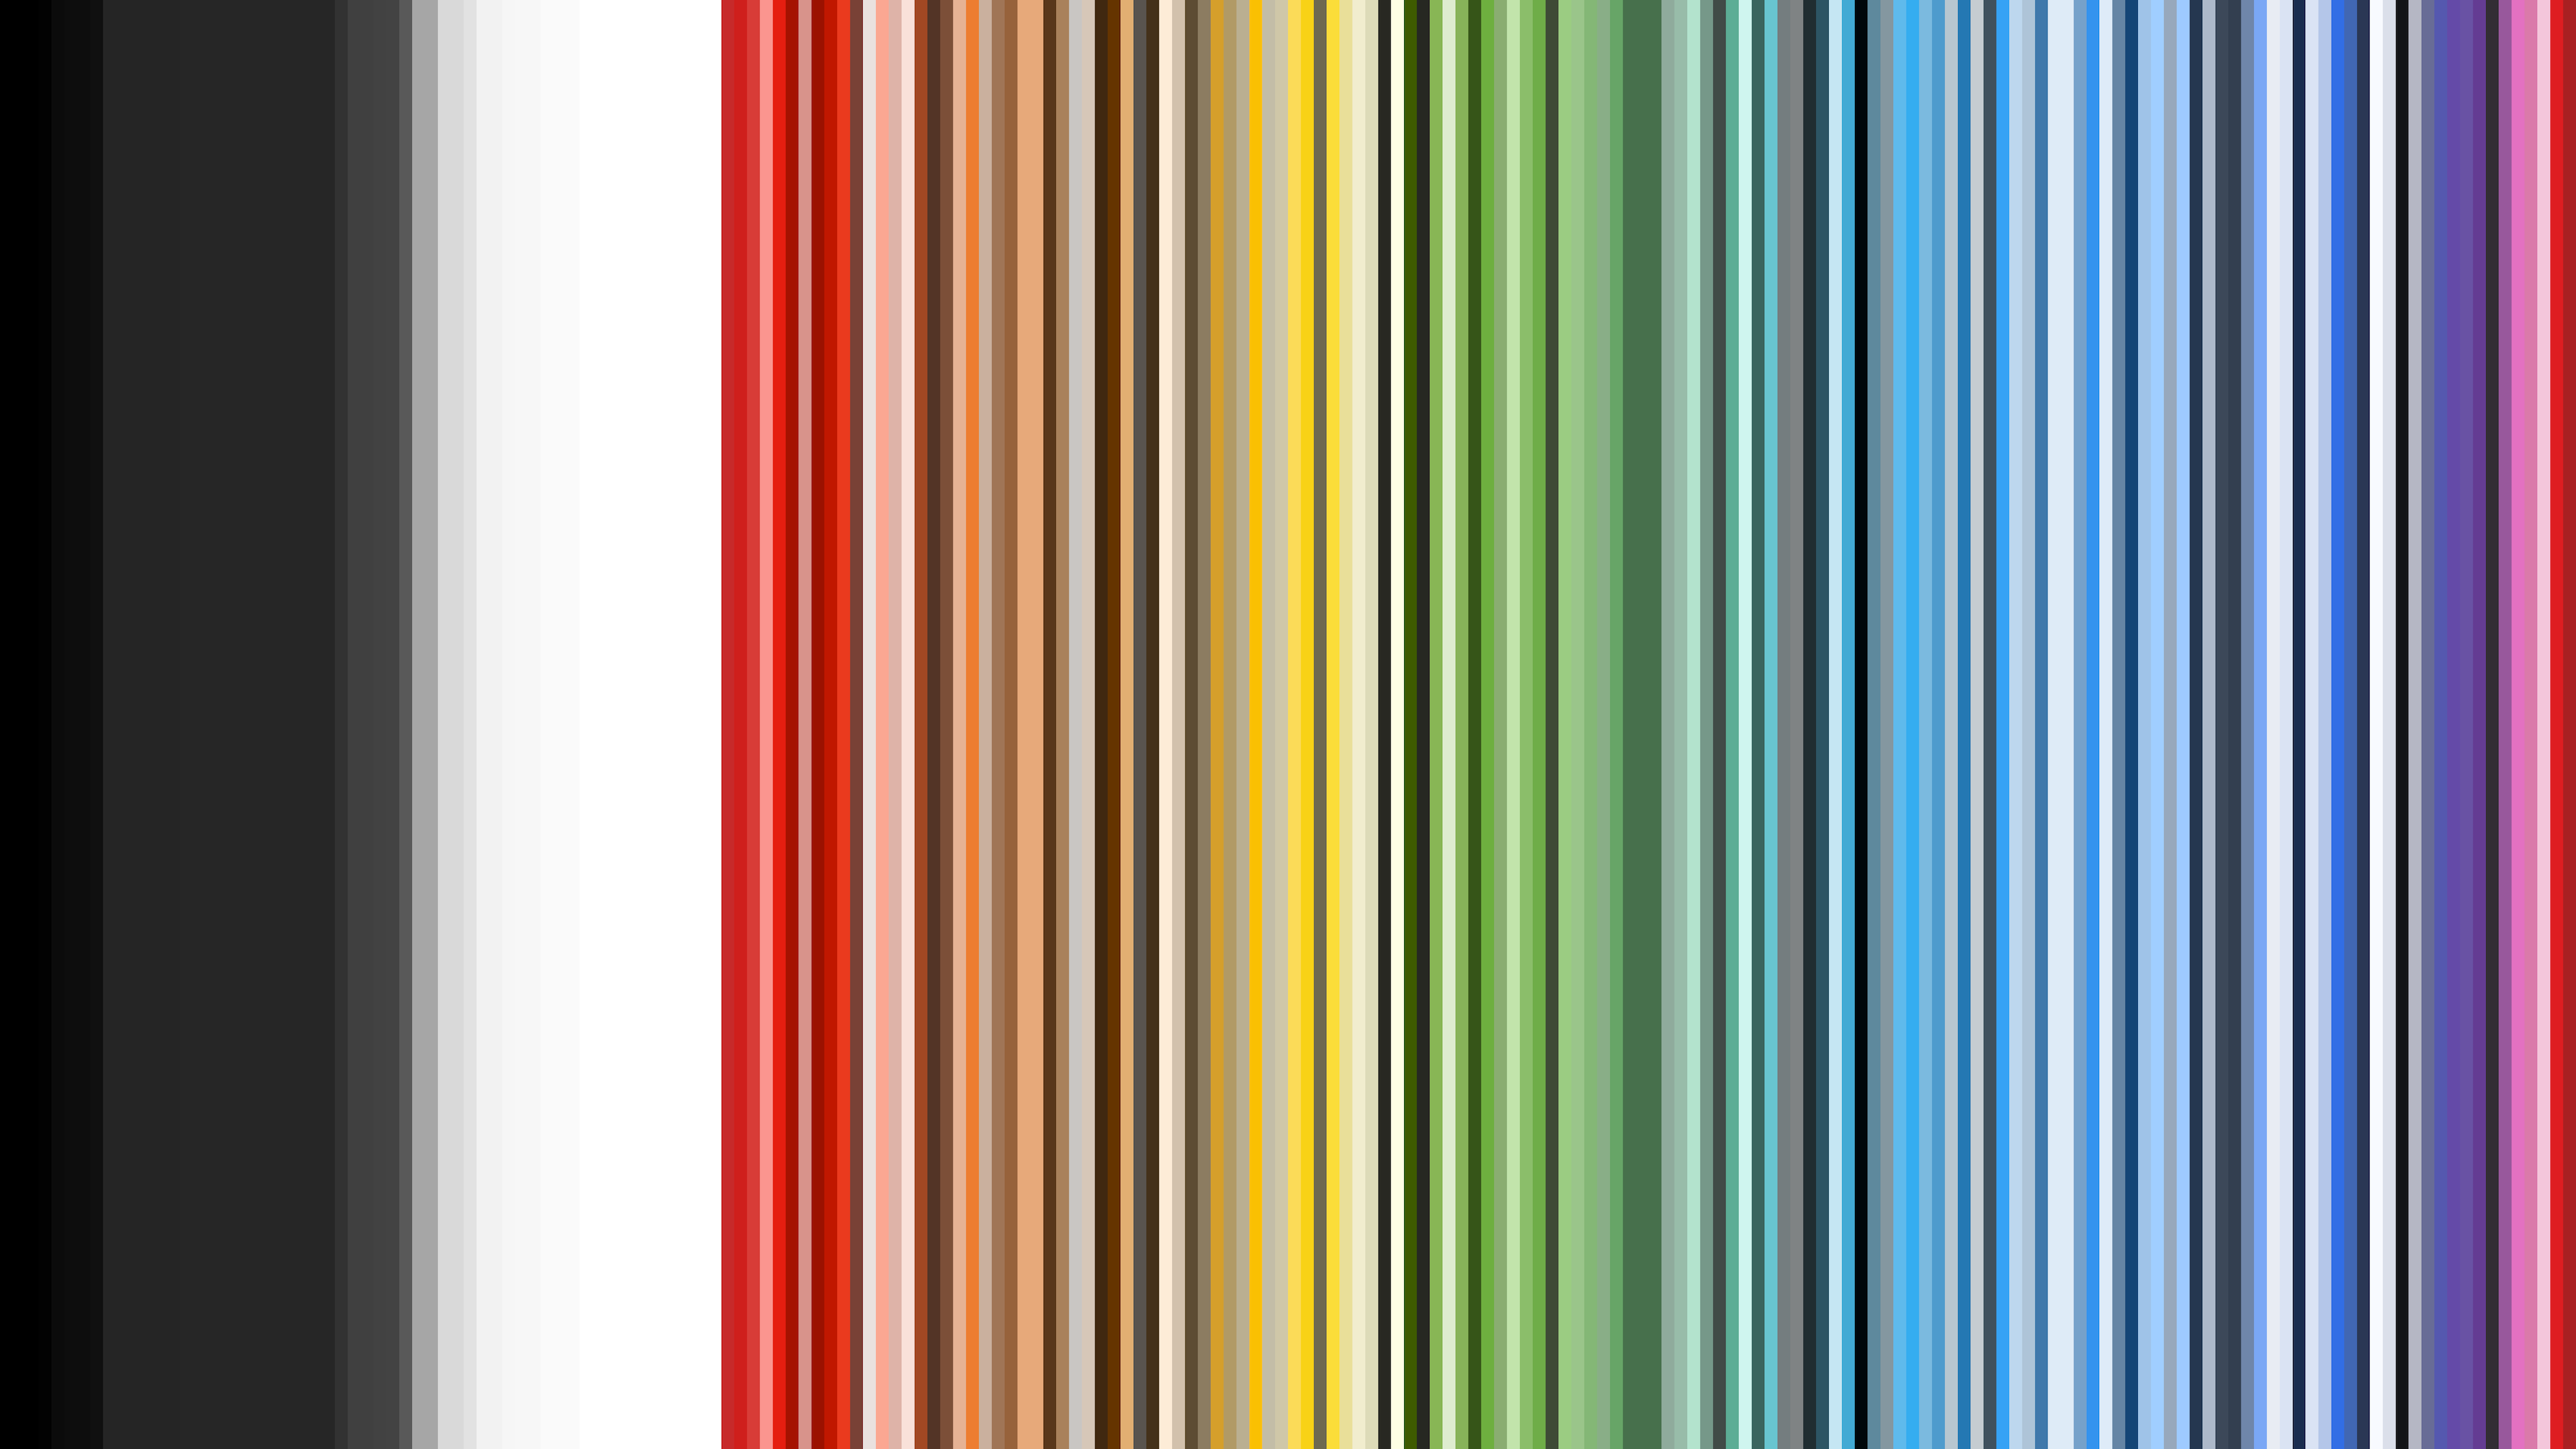 200 horizontally stacked bars, sorted by colour. It kind of looks
like a rainbow.